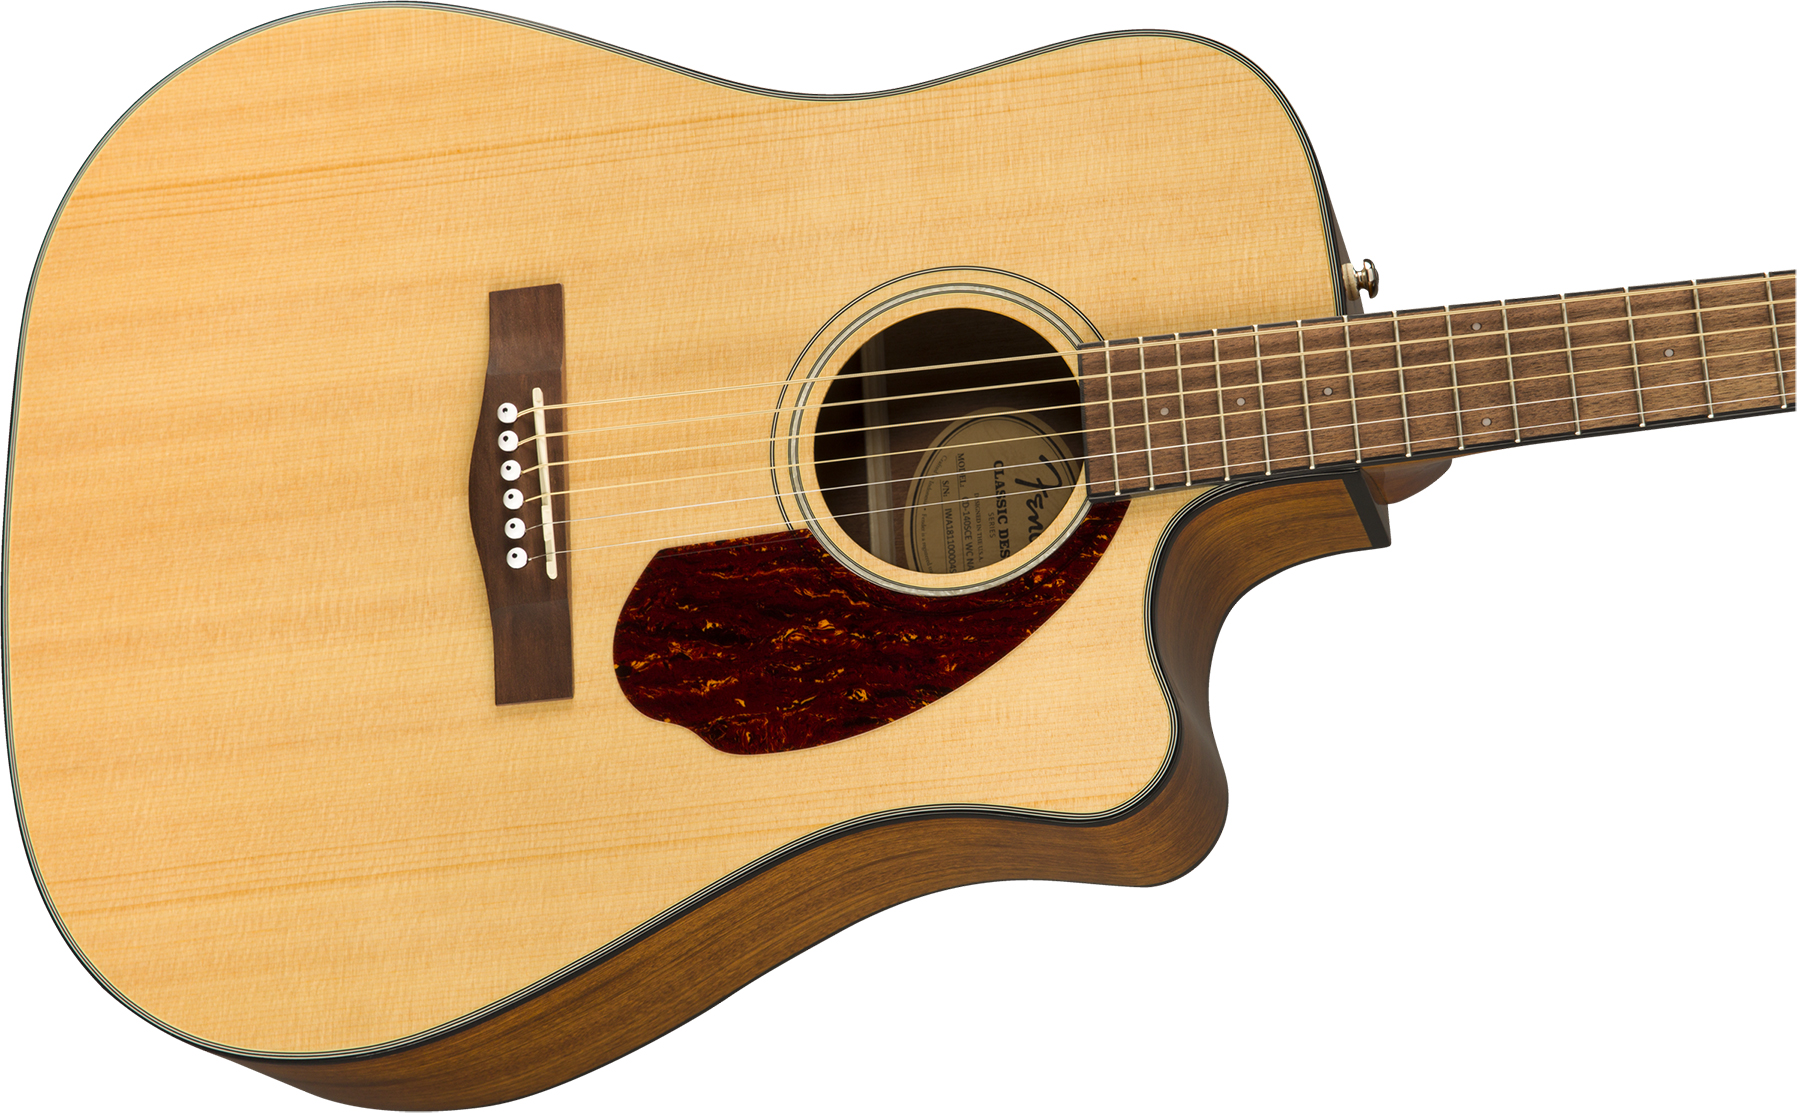 Fender Cd-140sce Classic Design Dreadnought Cw Epicea Ovangkol Wal +etui - Natural - Guitare Electro Acoustique - Variation 2